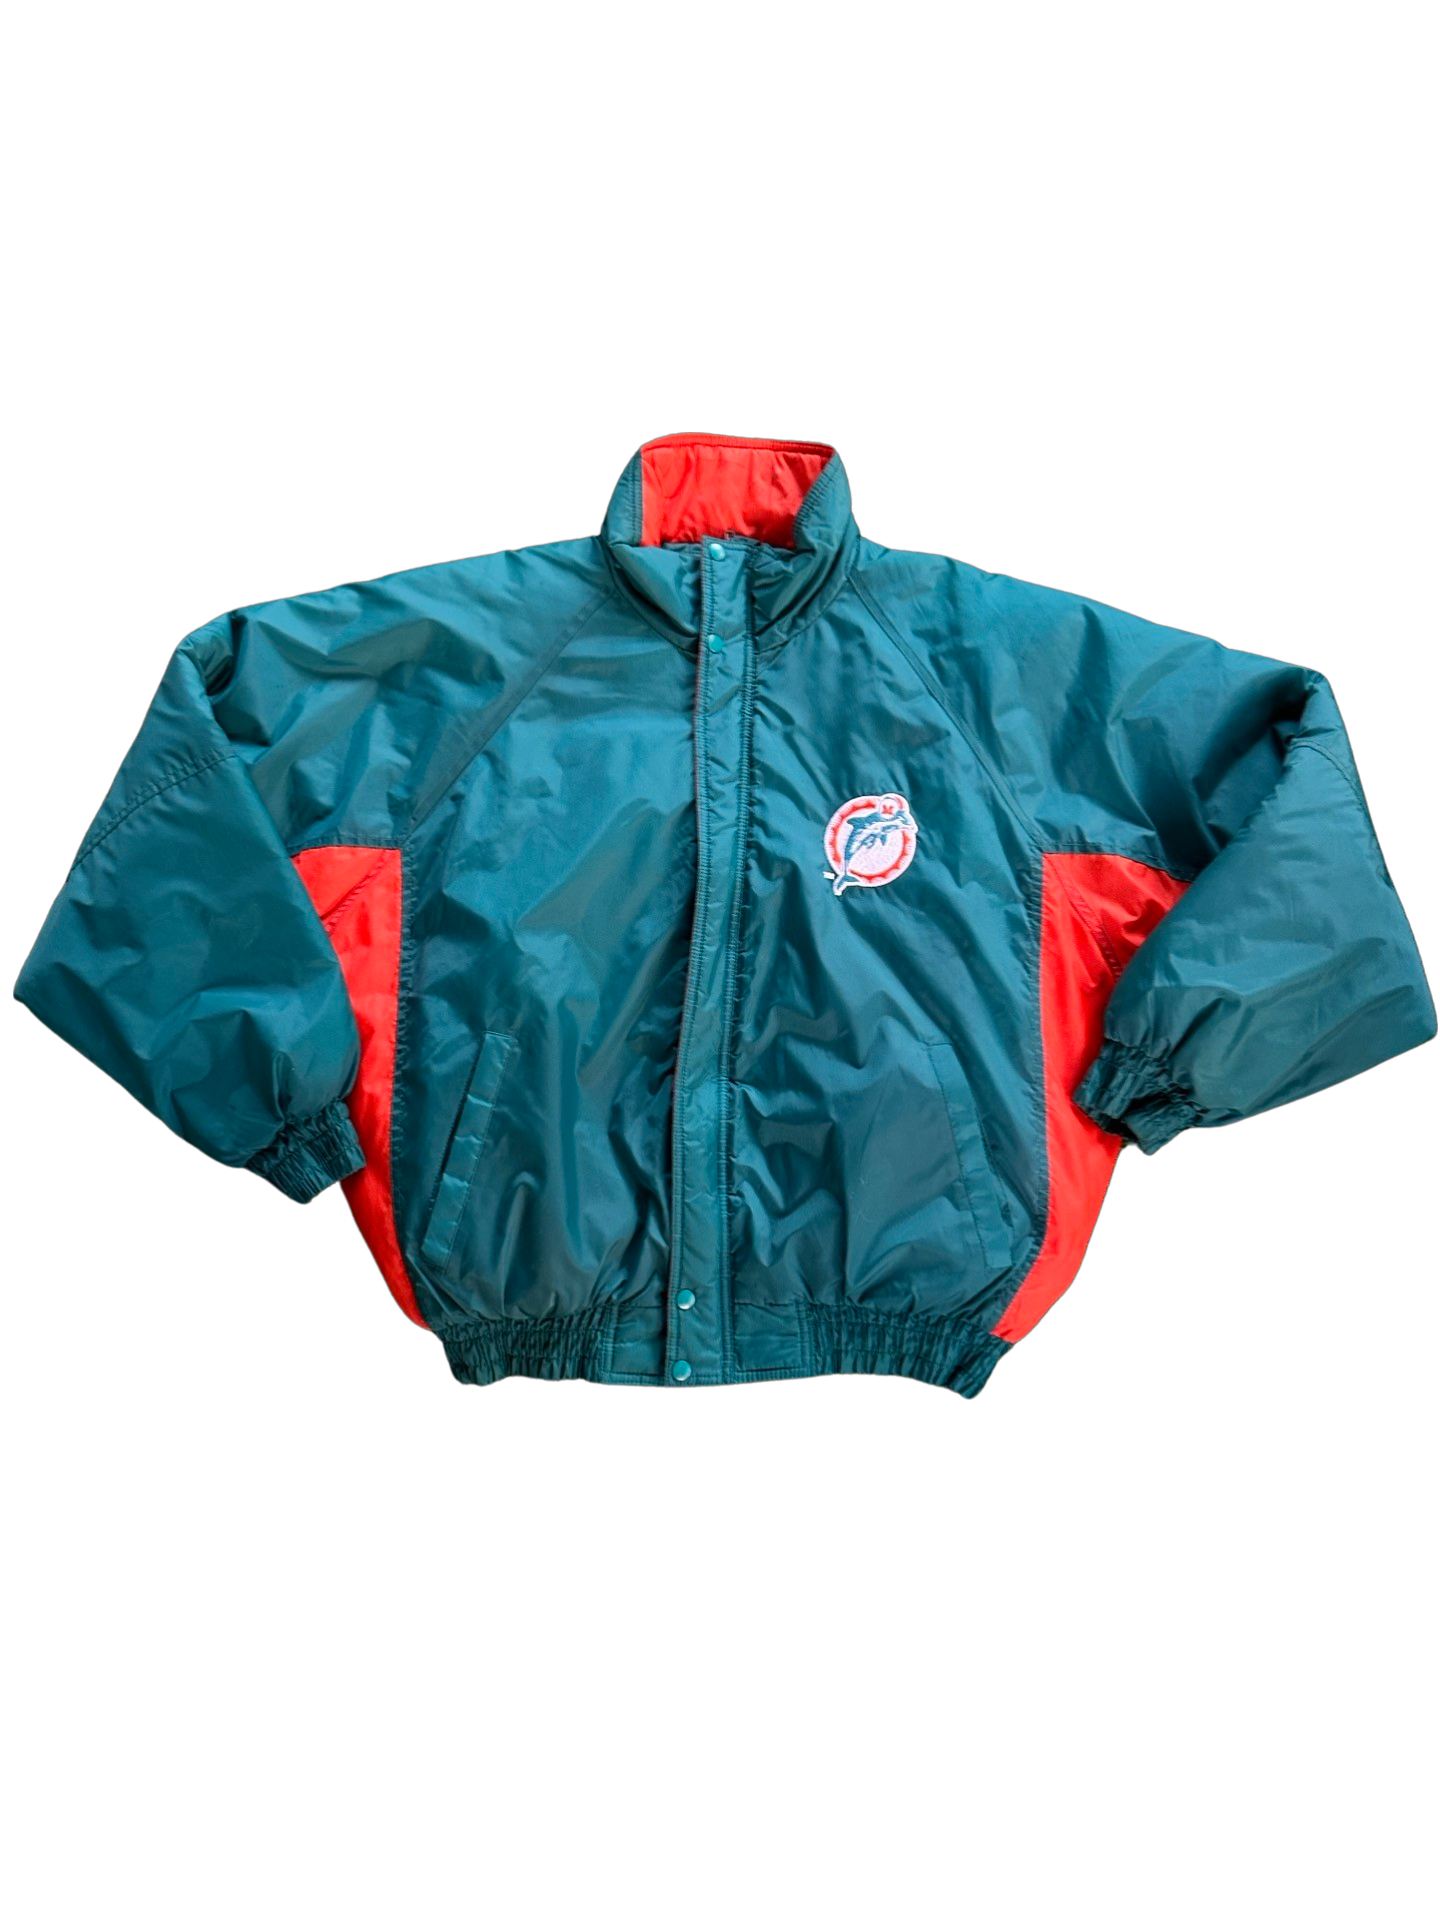 Miami Dolphins Puffer Jacket